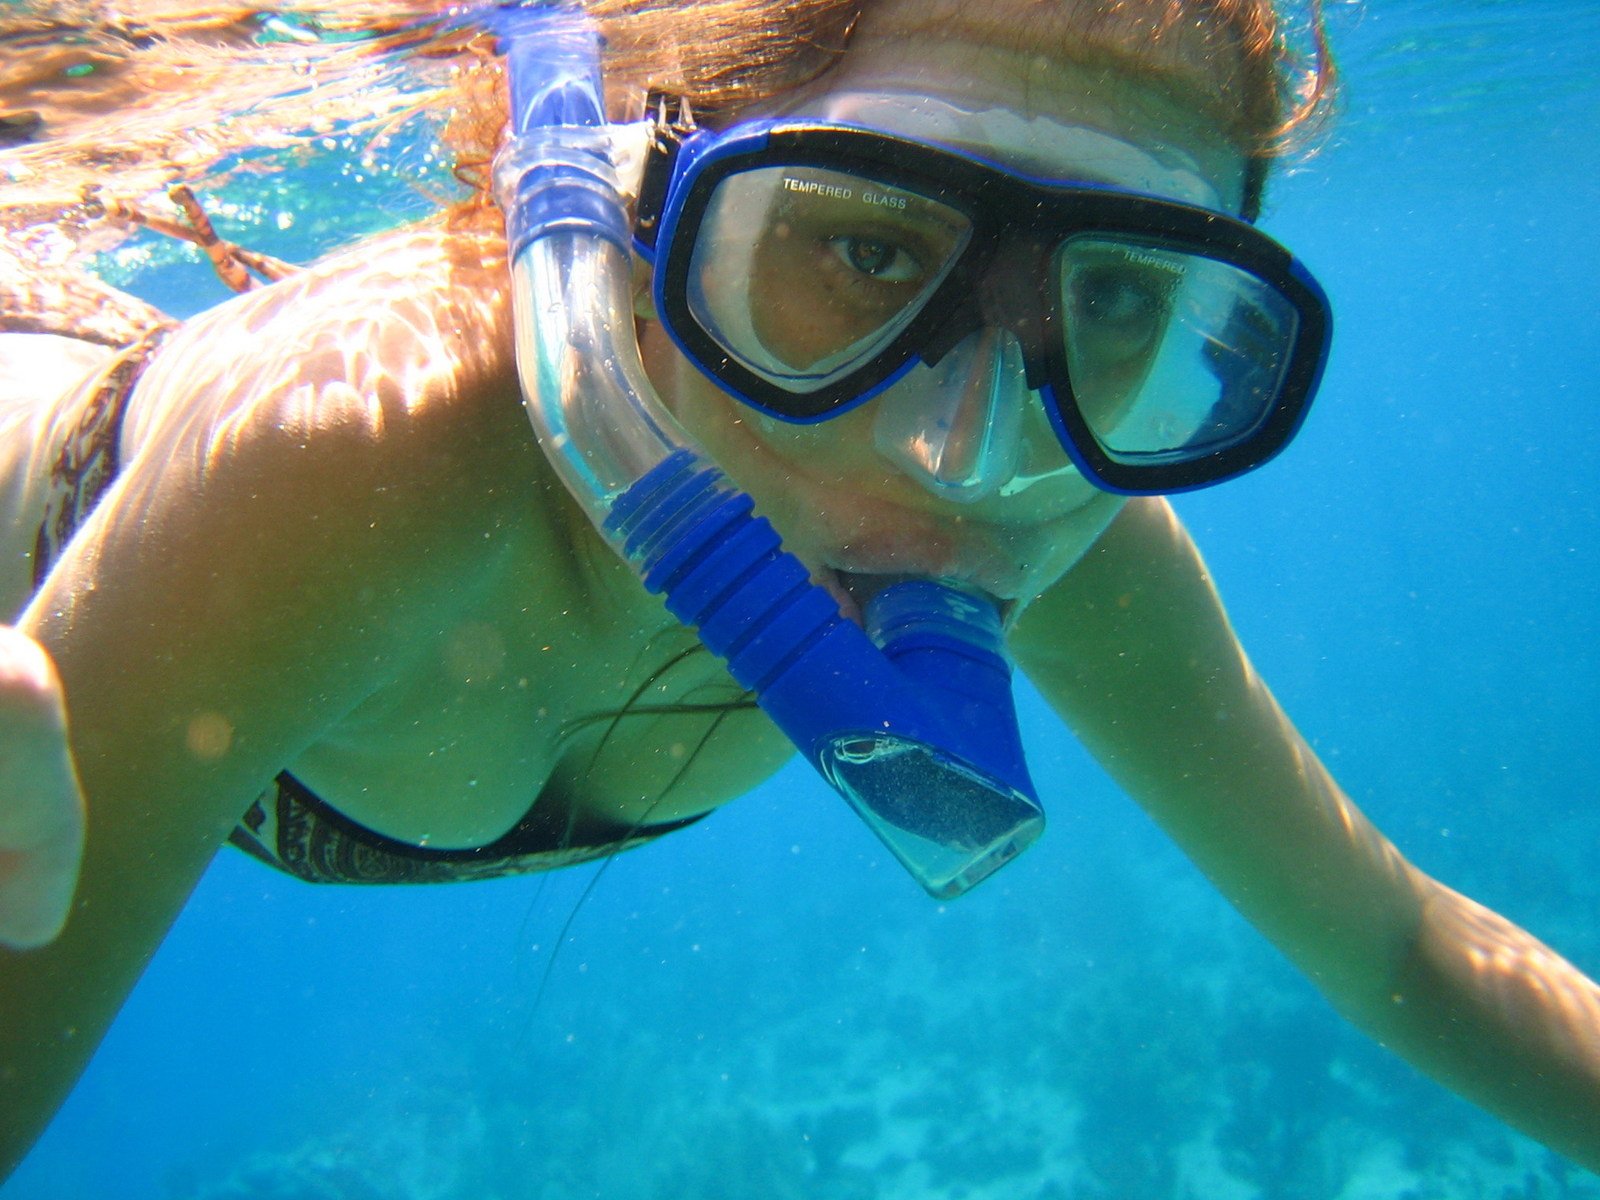 a person wearing goggles swimming in the water